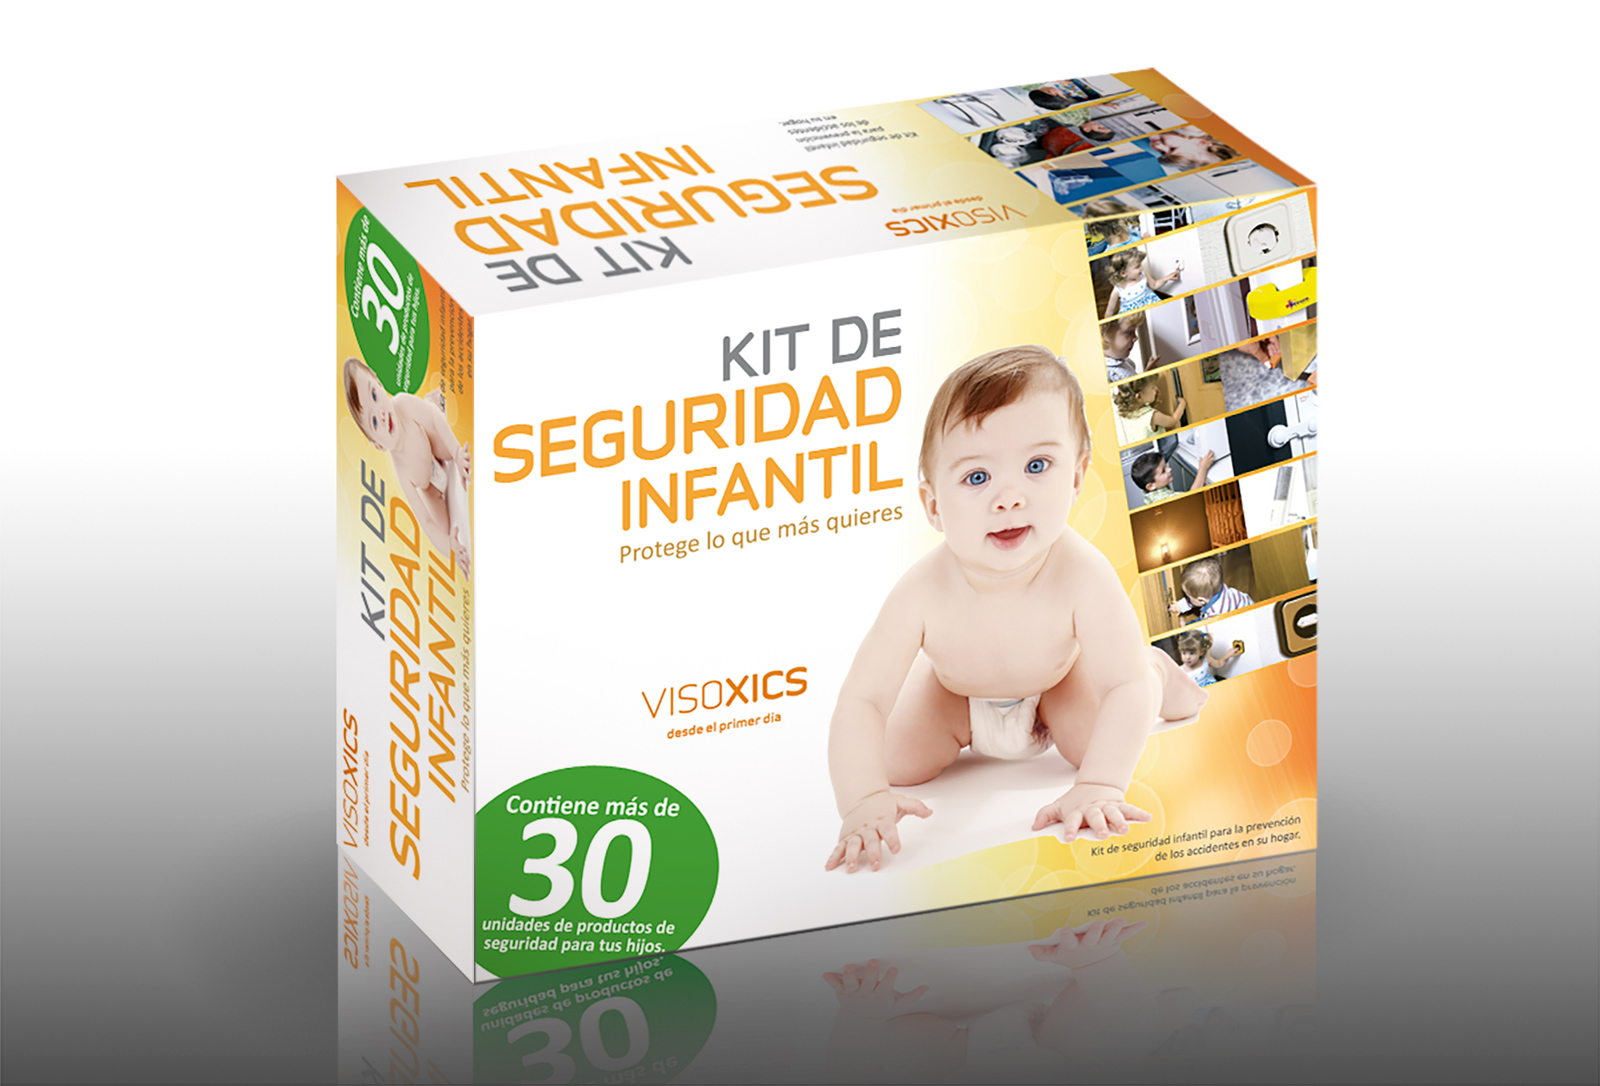 Portfolio of graphic and creative design works of boxes and packaging for manufacturer of child safety products